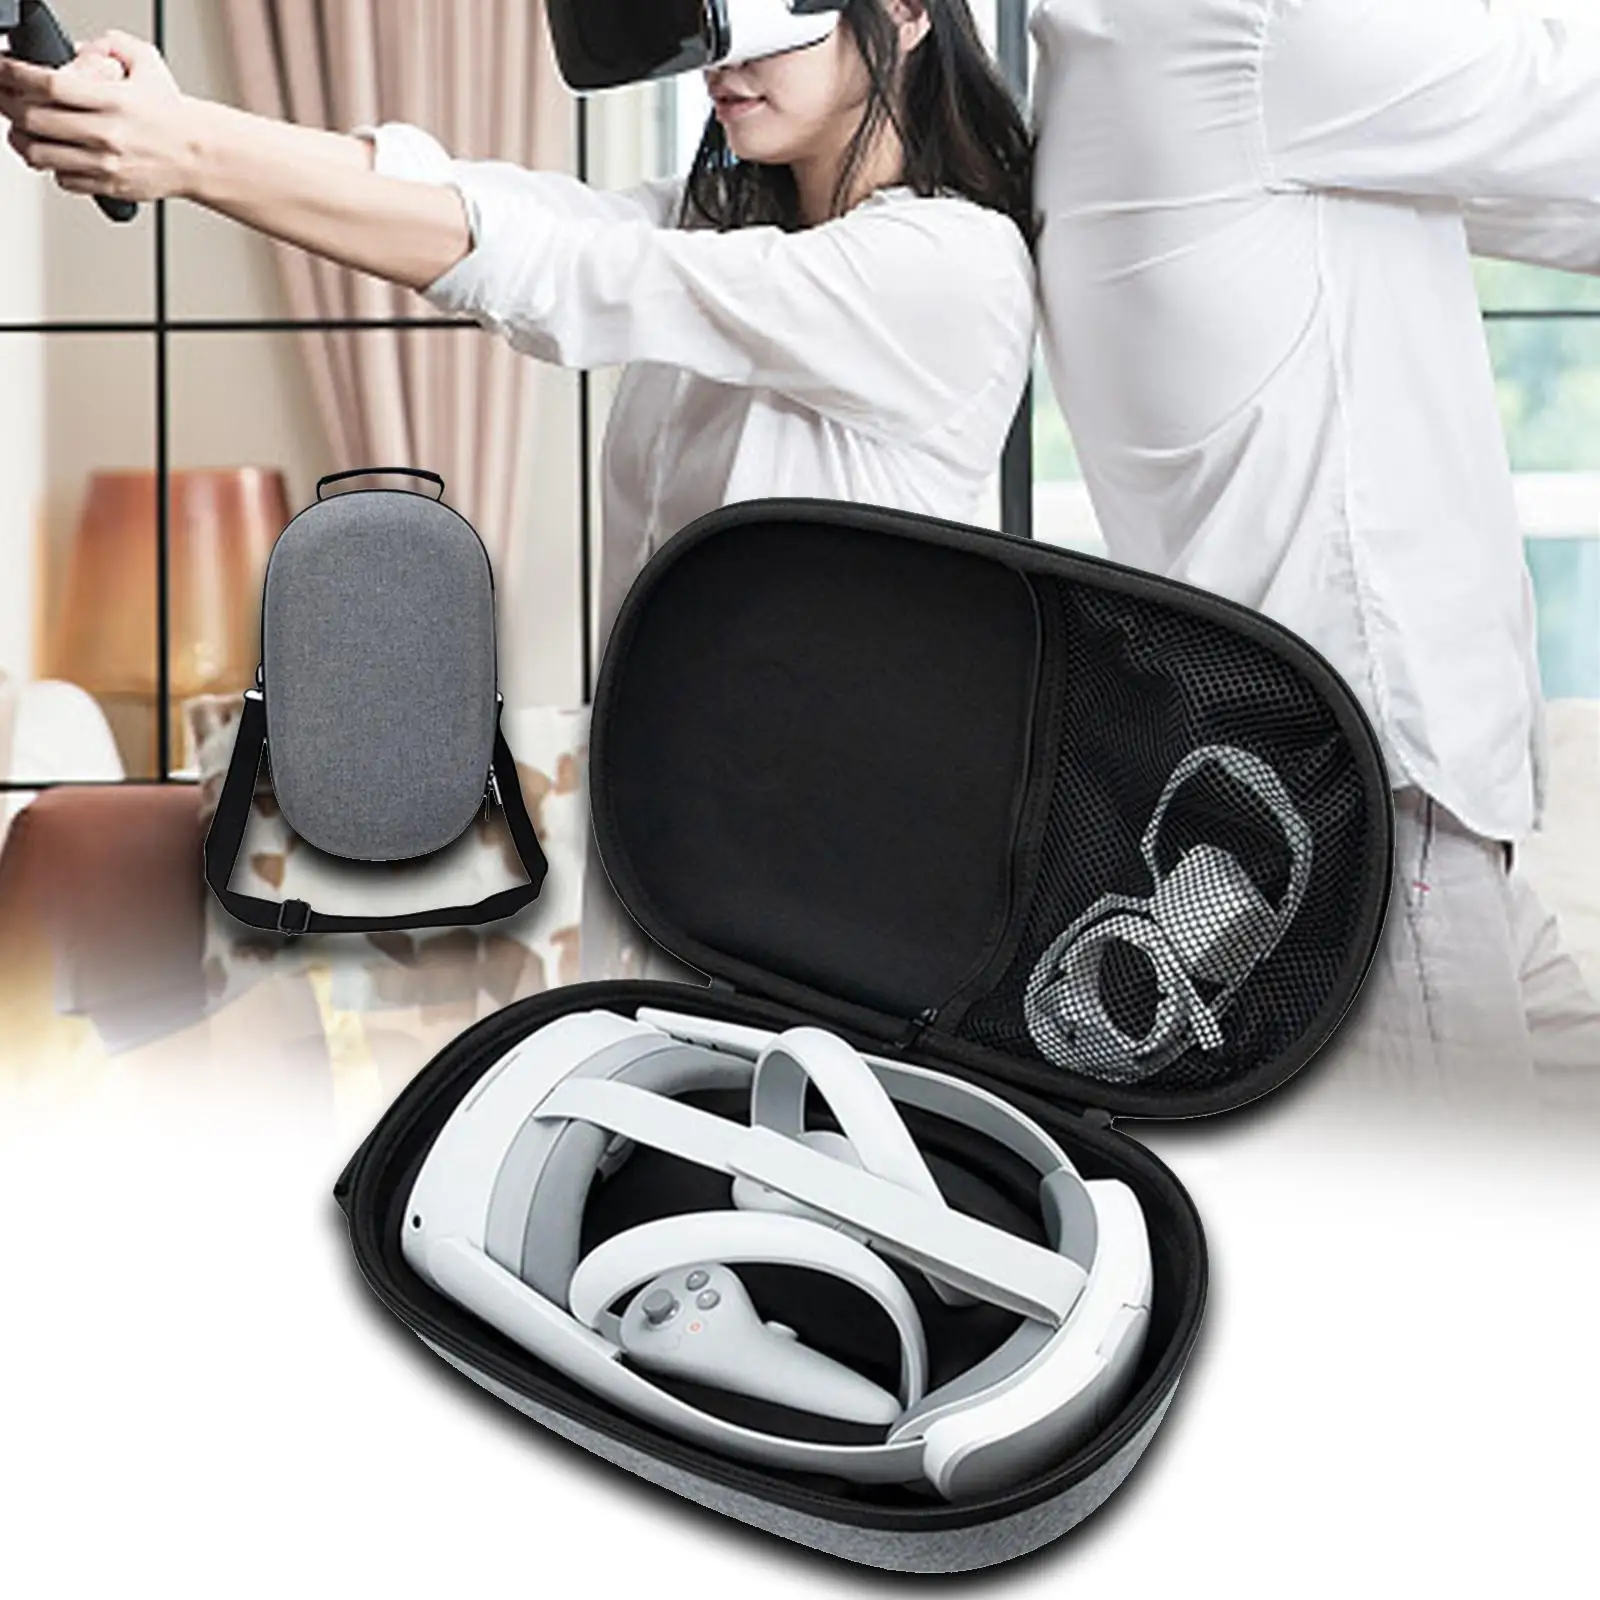 VR Glasses Bag Case Waterproof Multifunction Portable Protective with Handle Pouch VR Headset Bag VR Gaming Headset Carring Case